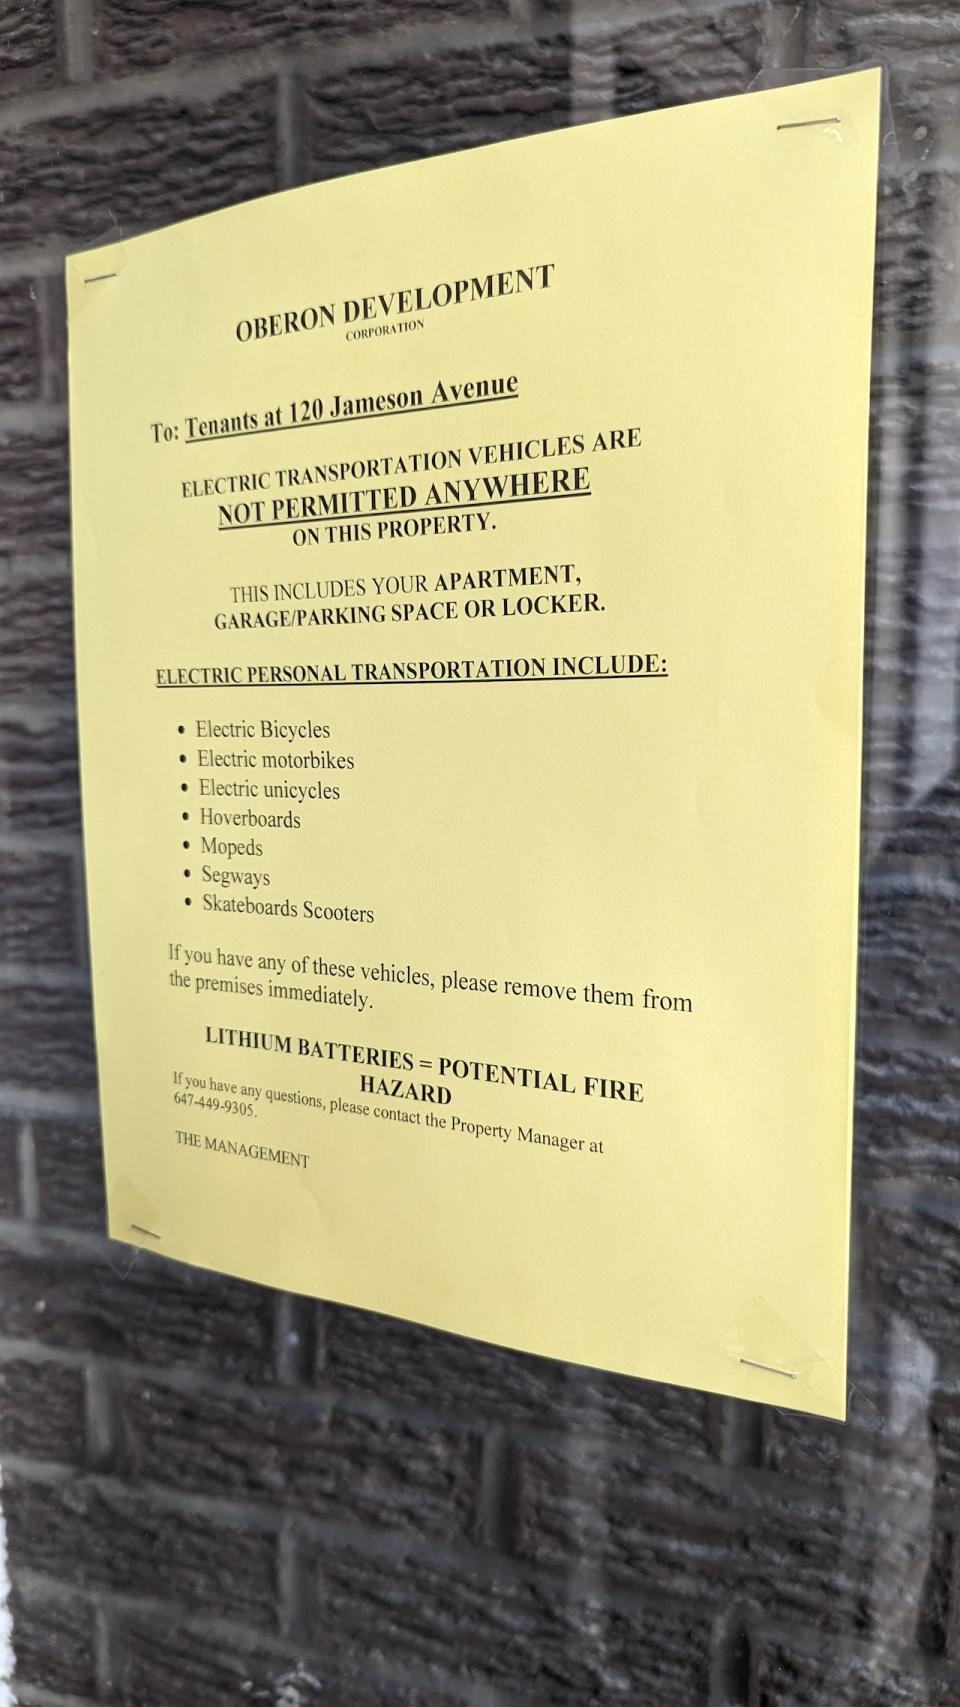 A notice of the ban on electric transportation devices posted at 120 Jameson Avenue. 